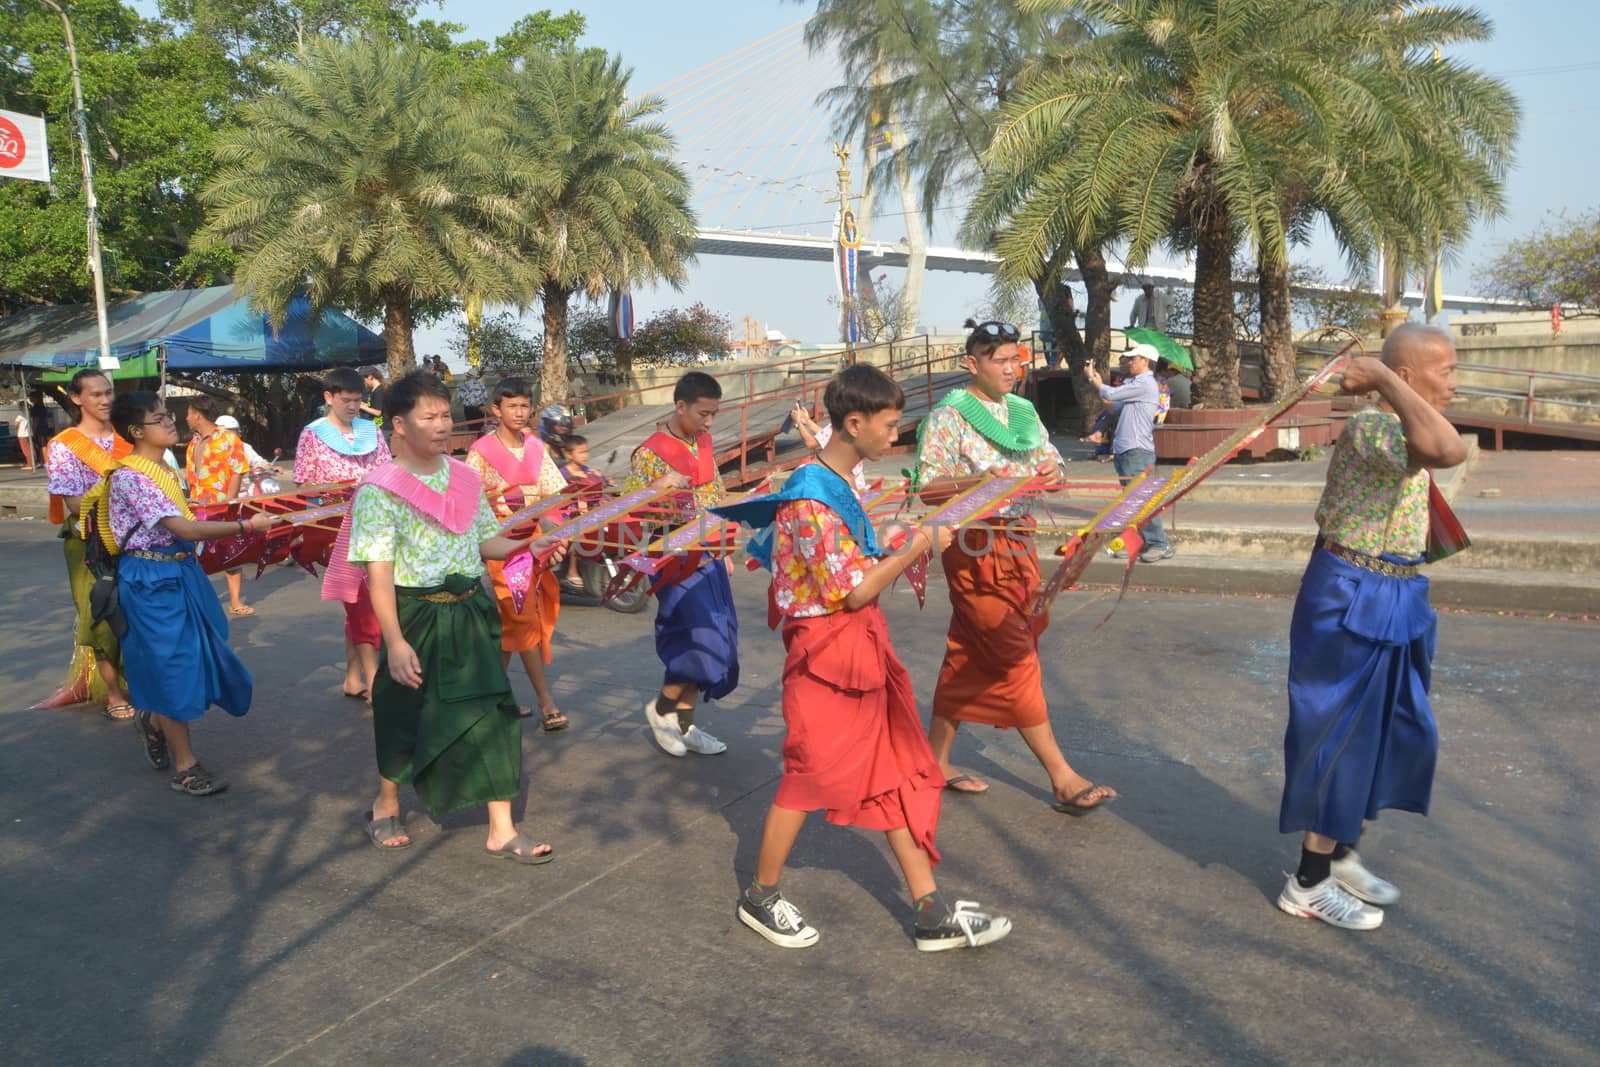 Samut Prakan,Thailand-APRIL 13,2017: Songkran Festival in the Thai-Mon style, featuring a magnificent parade, and see a procession of swan and centipede flags.

